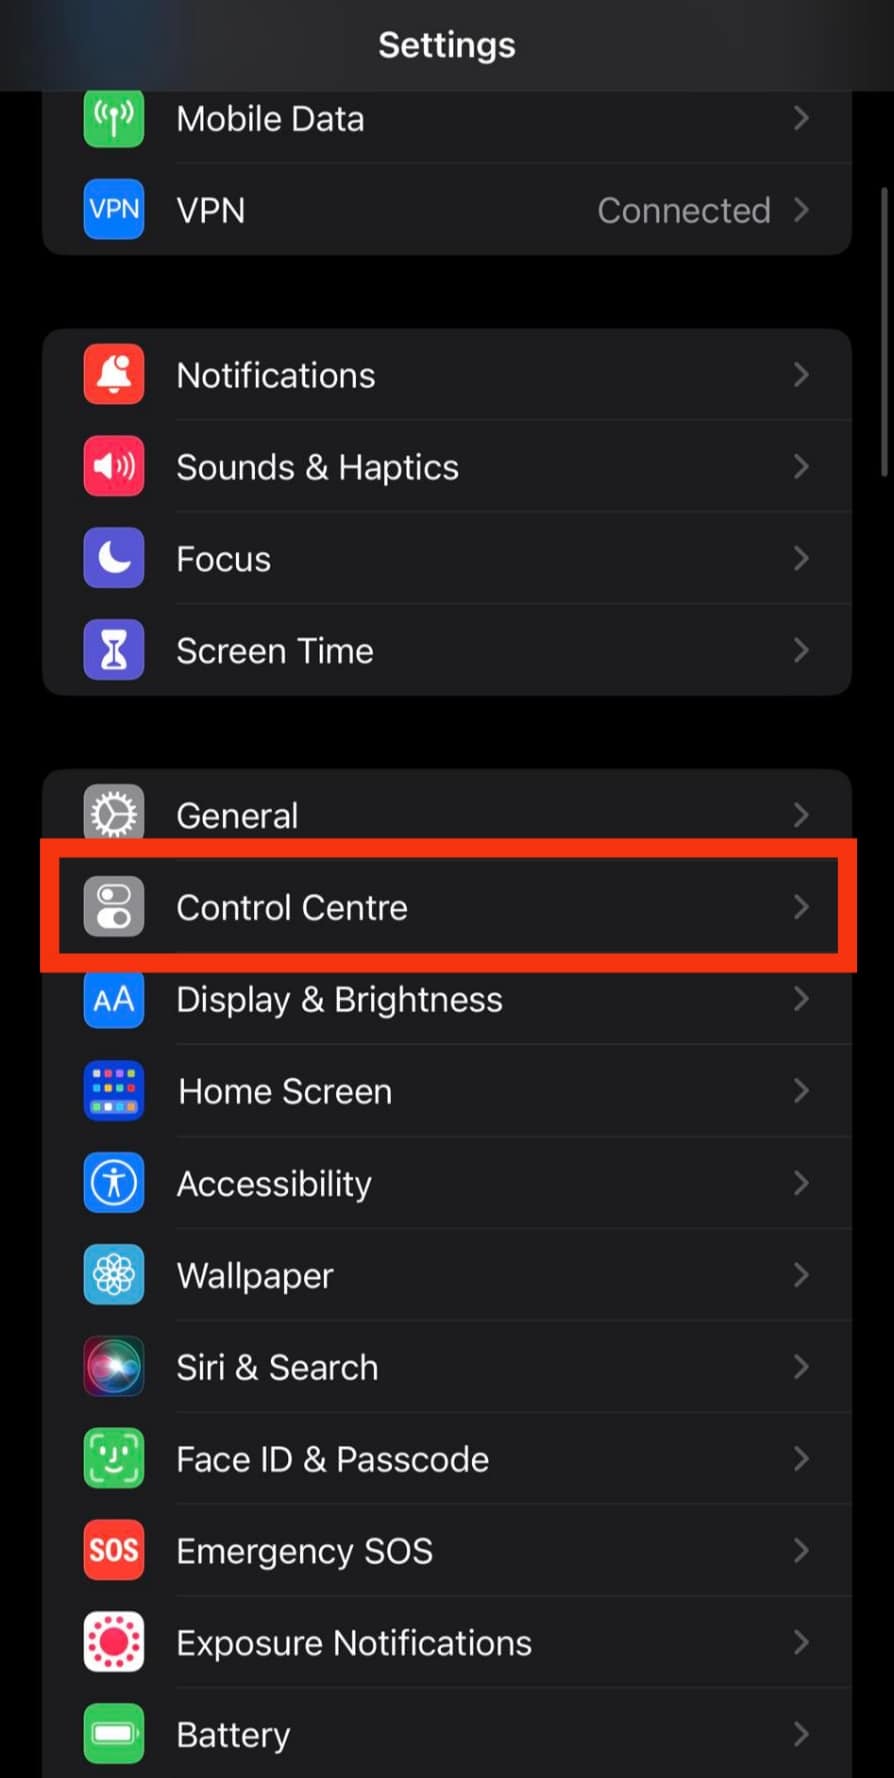 Select The Control Centre Option